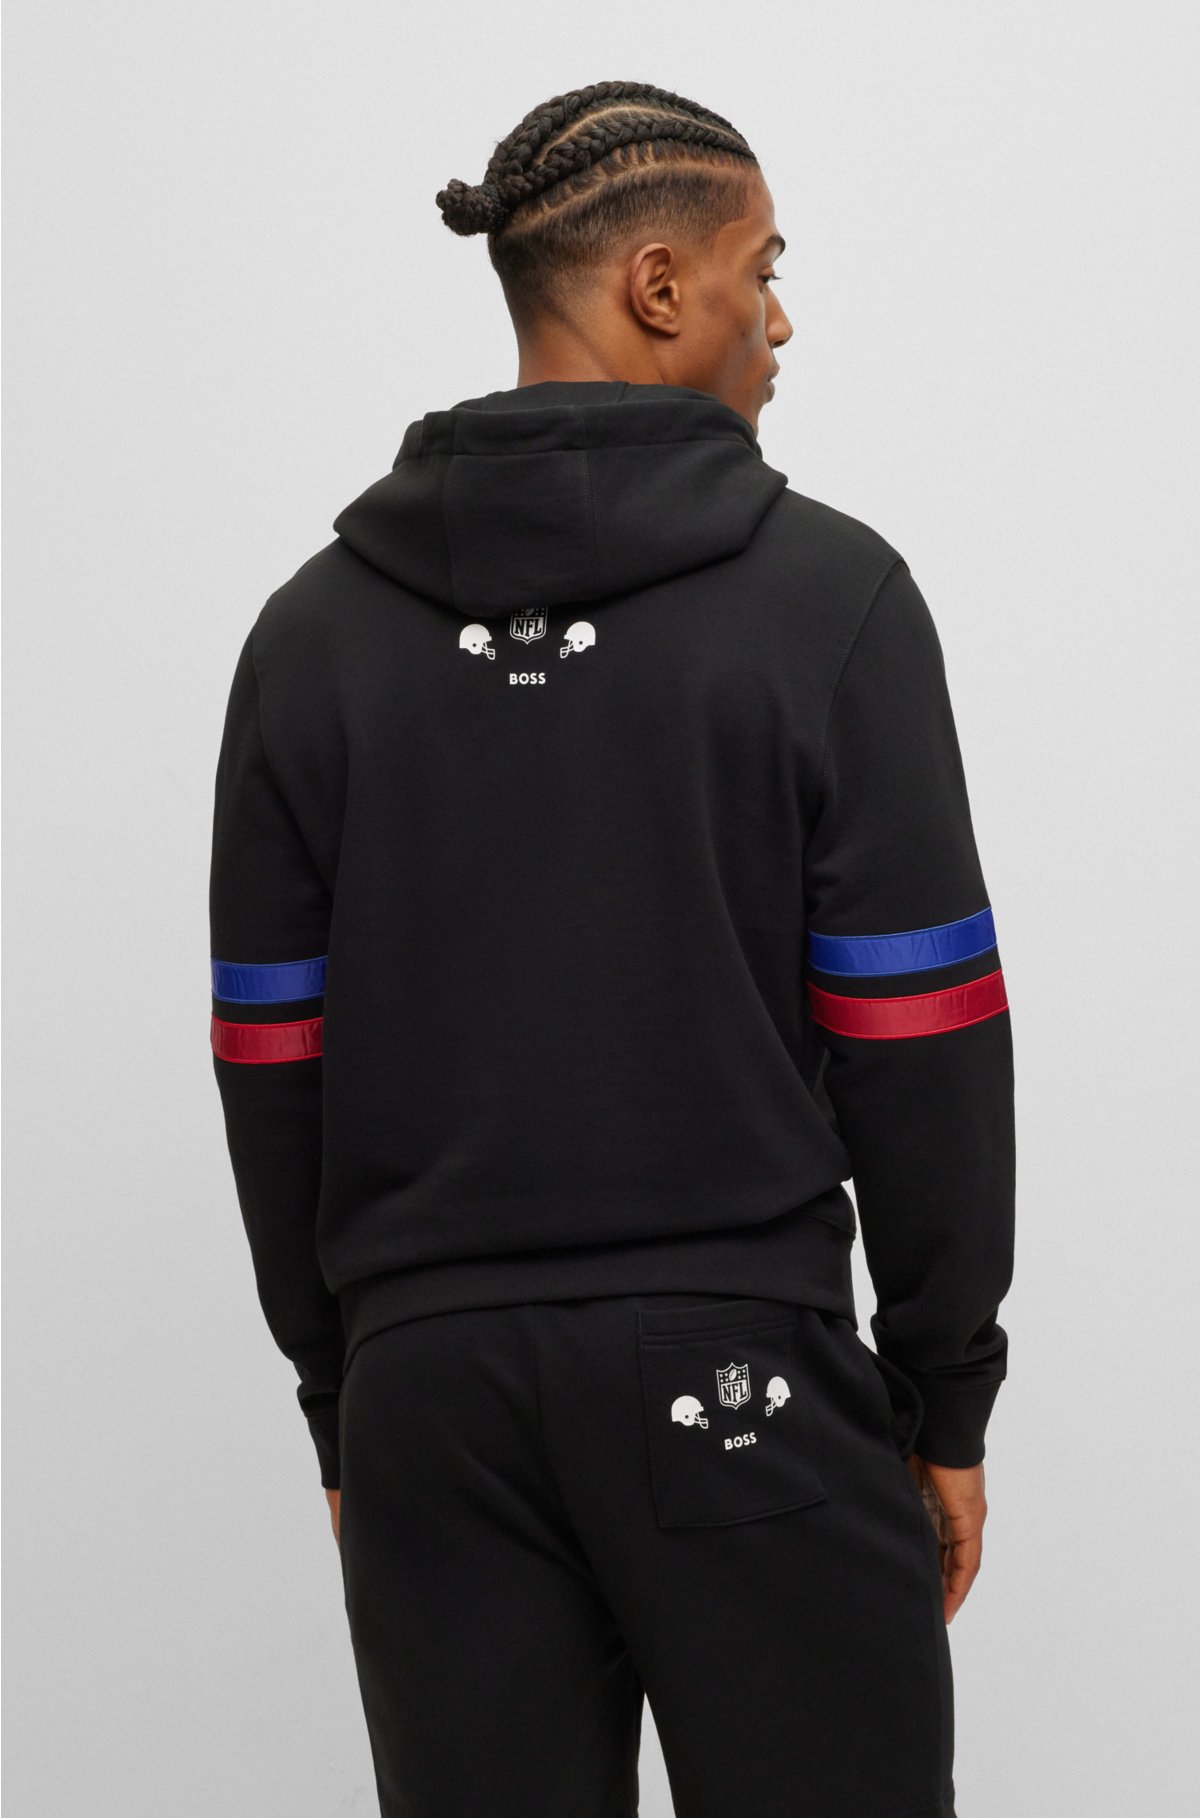 BOSS x NFL cotton-terry hoodie with collaborative branding, Giants